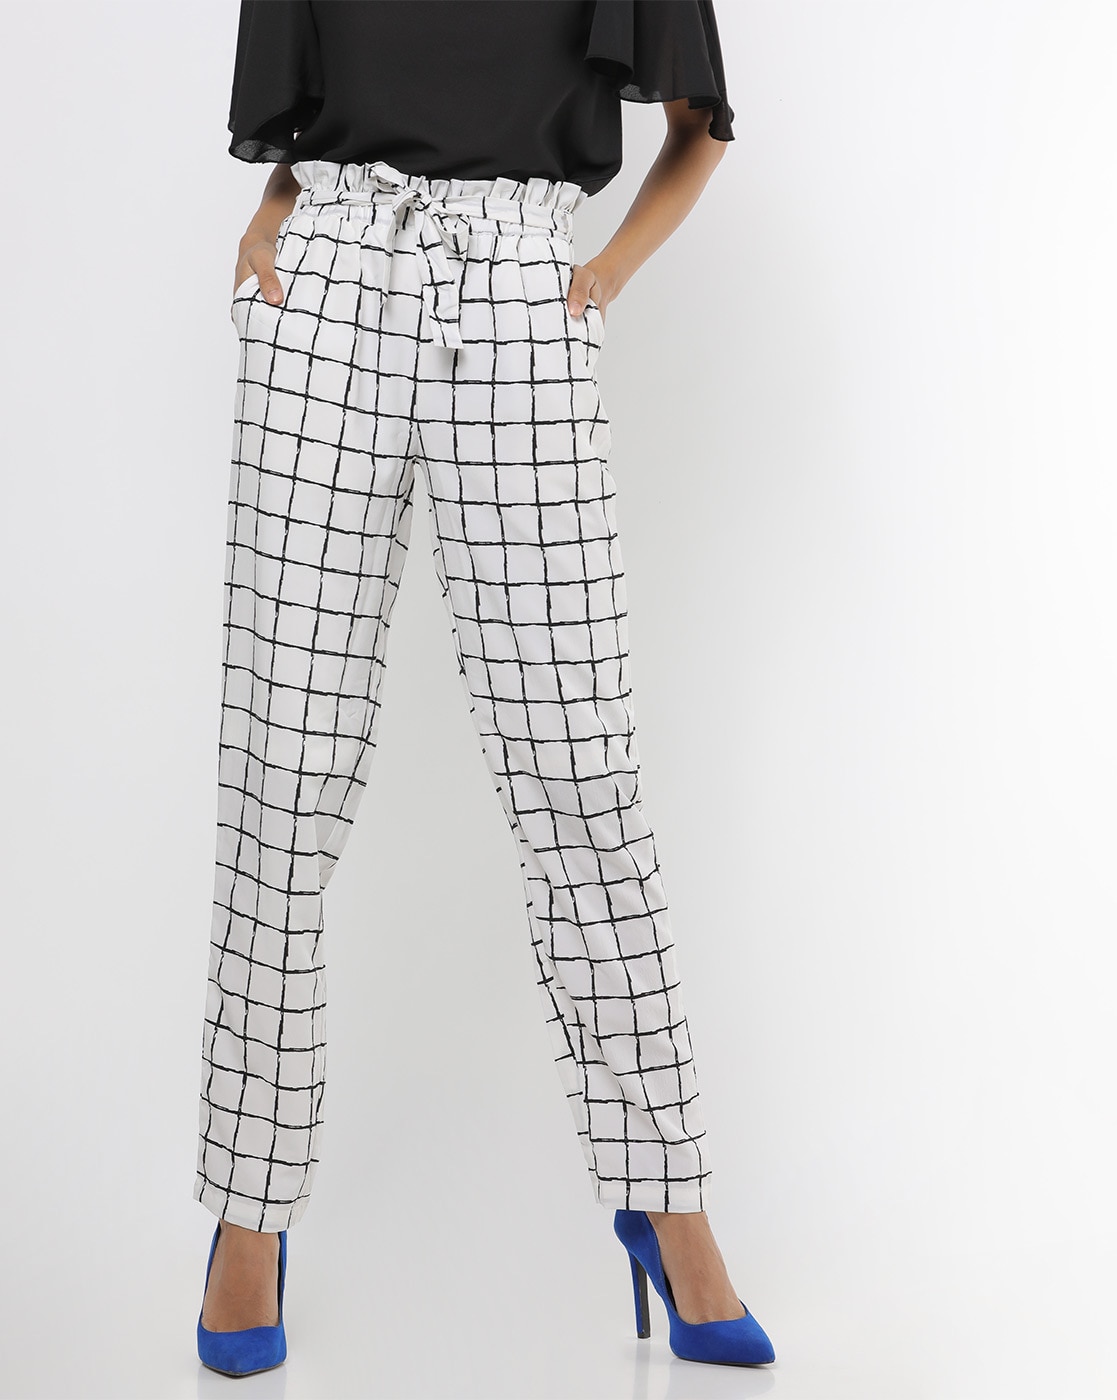 Checkered Pants  How to Wear Checkered Pants in 2021